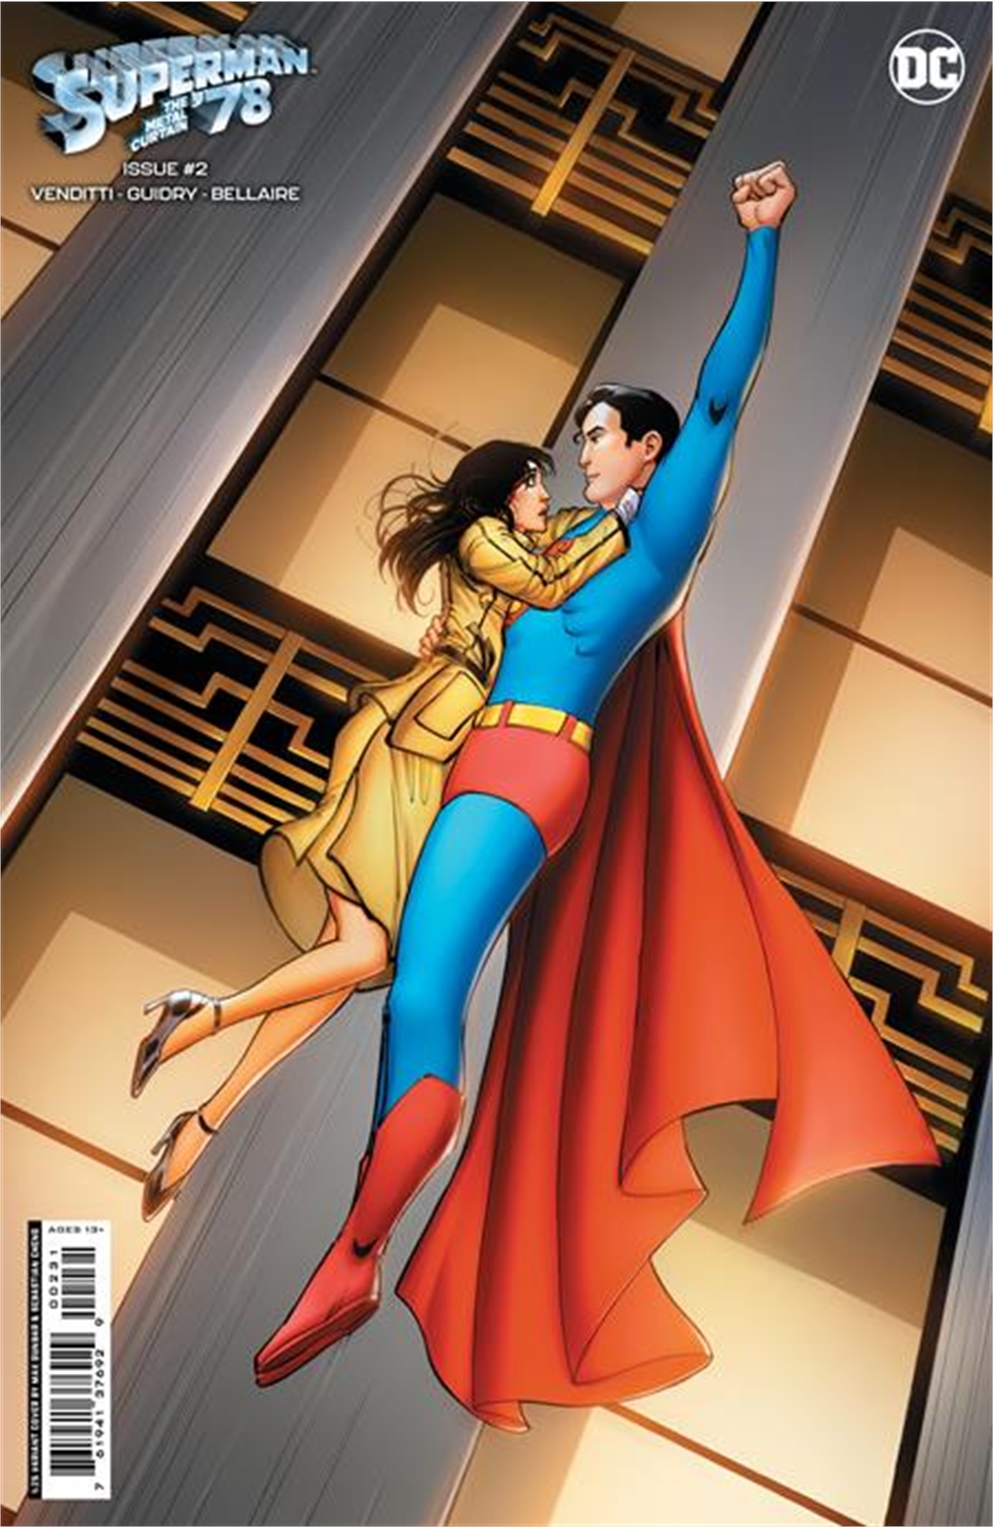 Superman '78 The Metal Curtain #2 Cover C 1 for 25 Incentive Max Dunbar Card Stock Variant (Of 6)